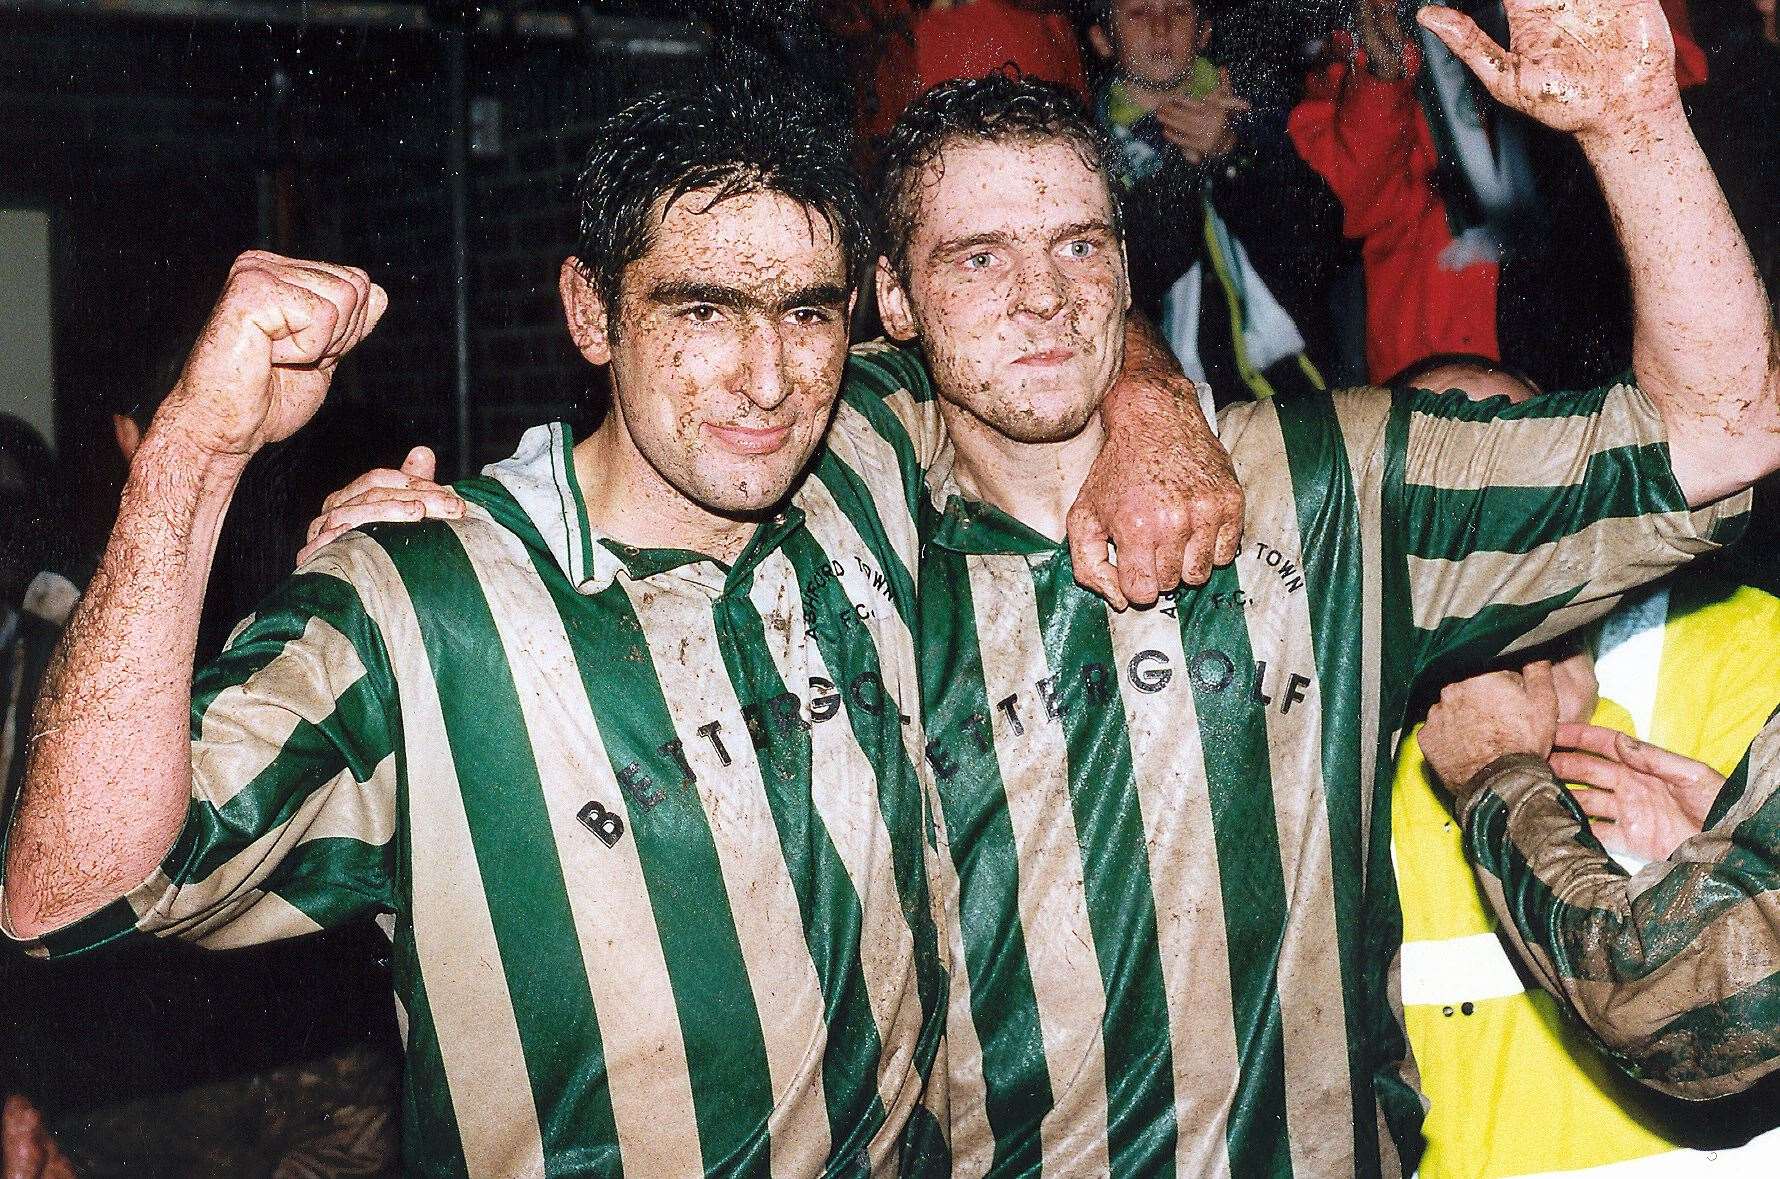 Ashford Town legends Dave Arter and Nicky Dent – goalscoring machines back in the 1990s